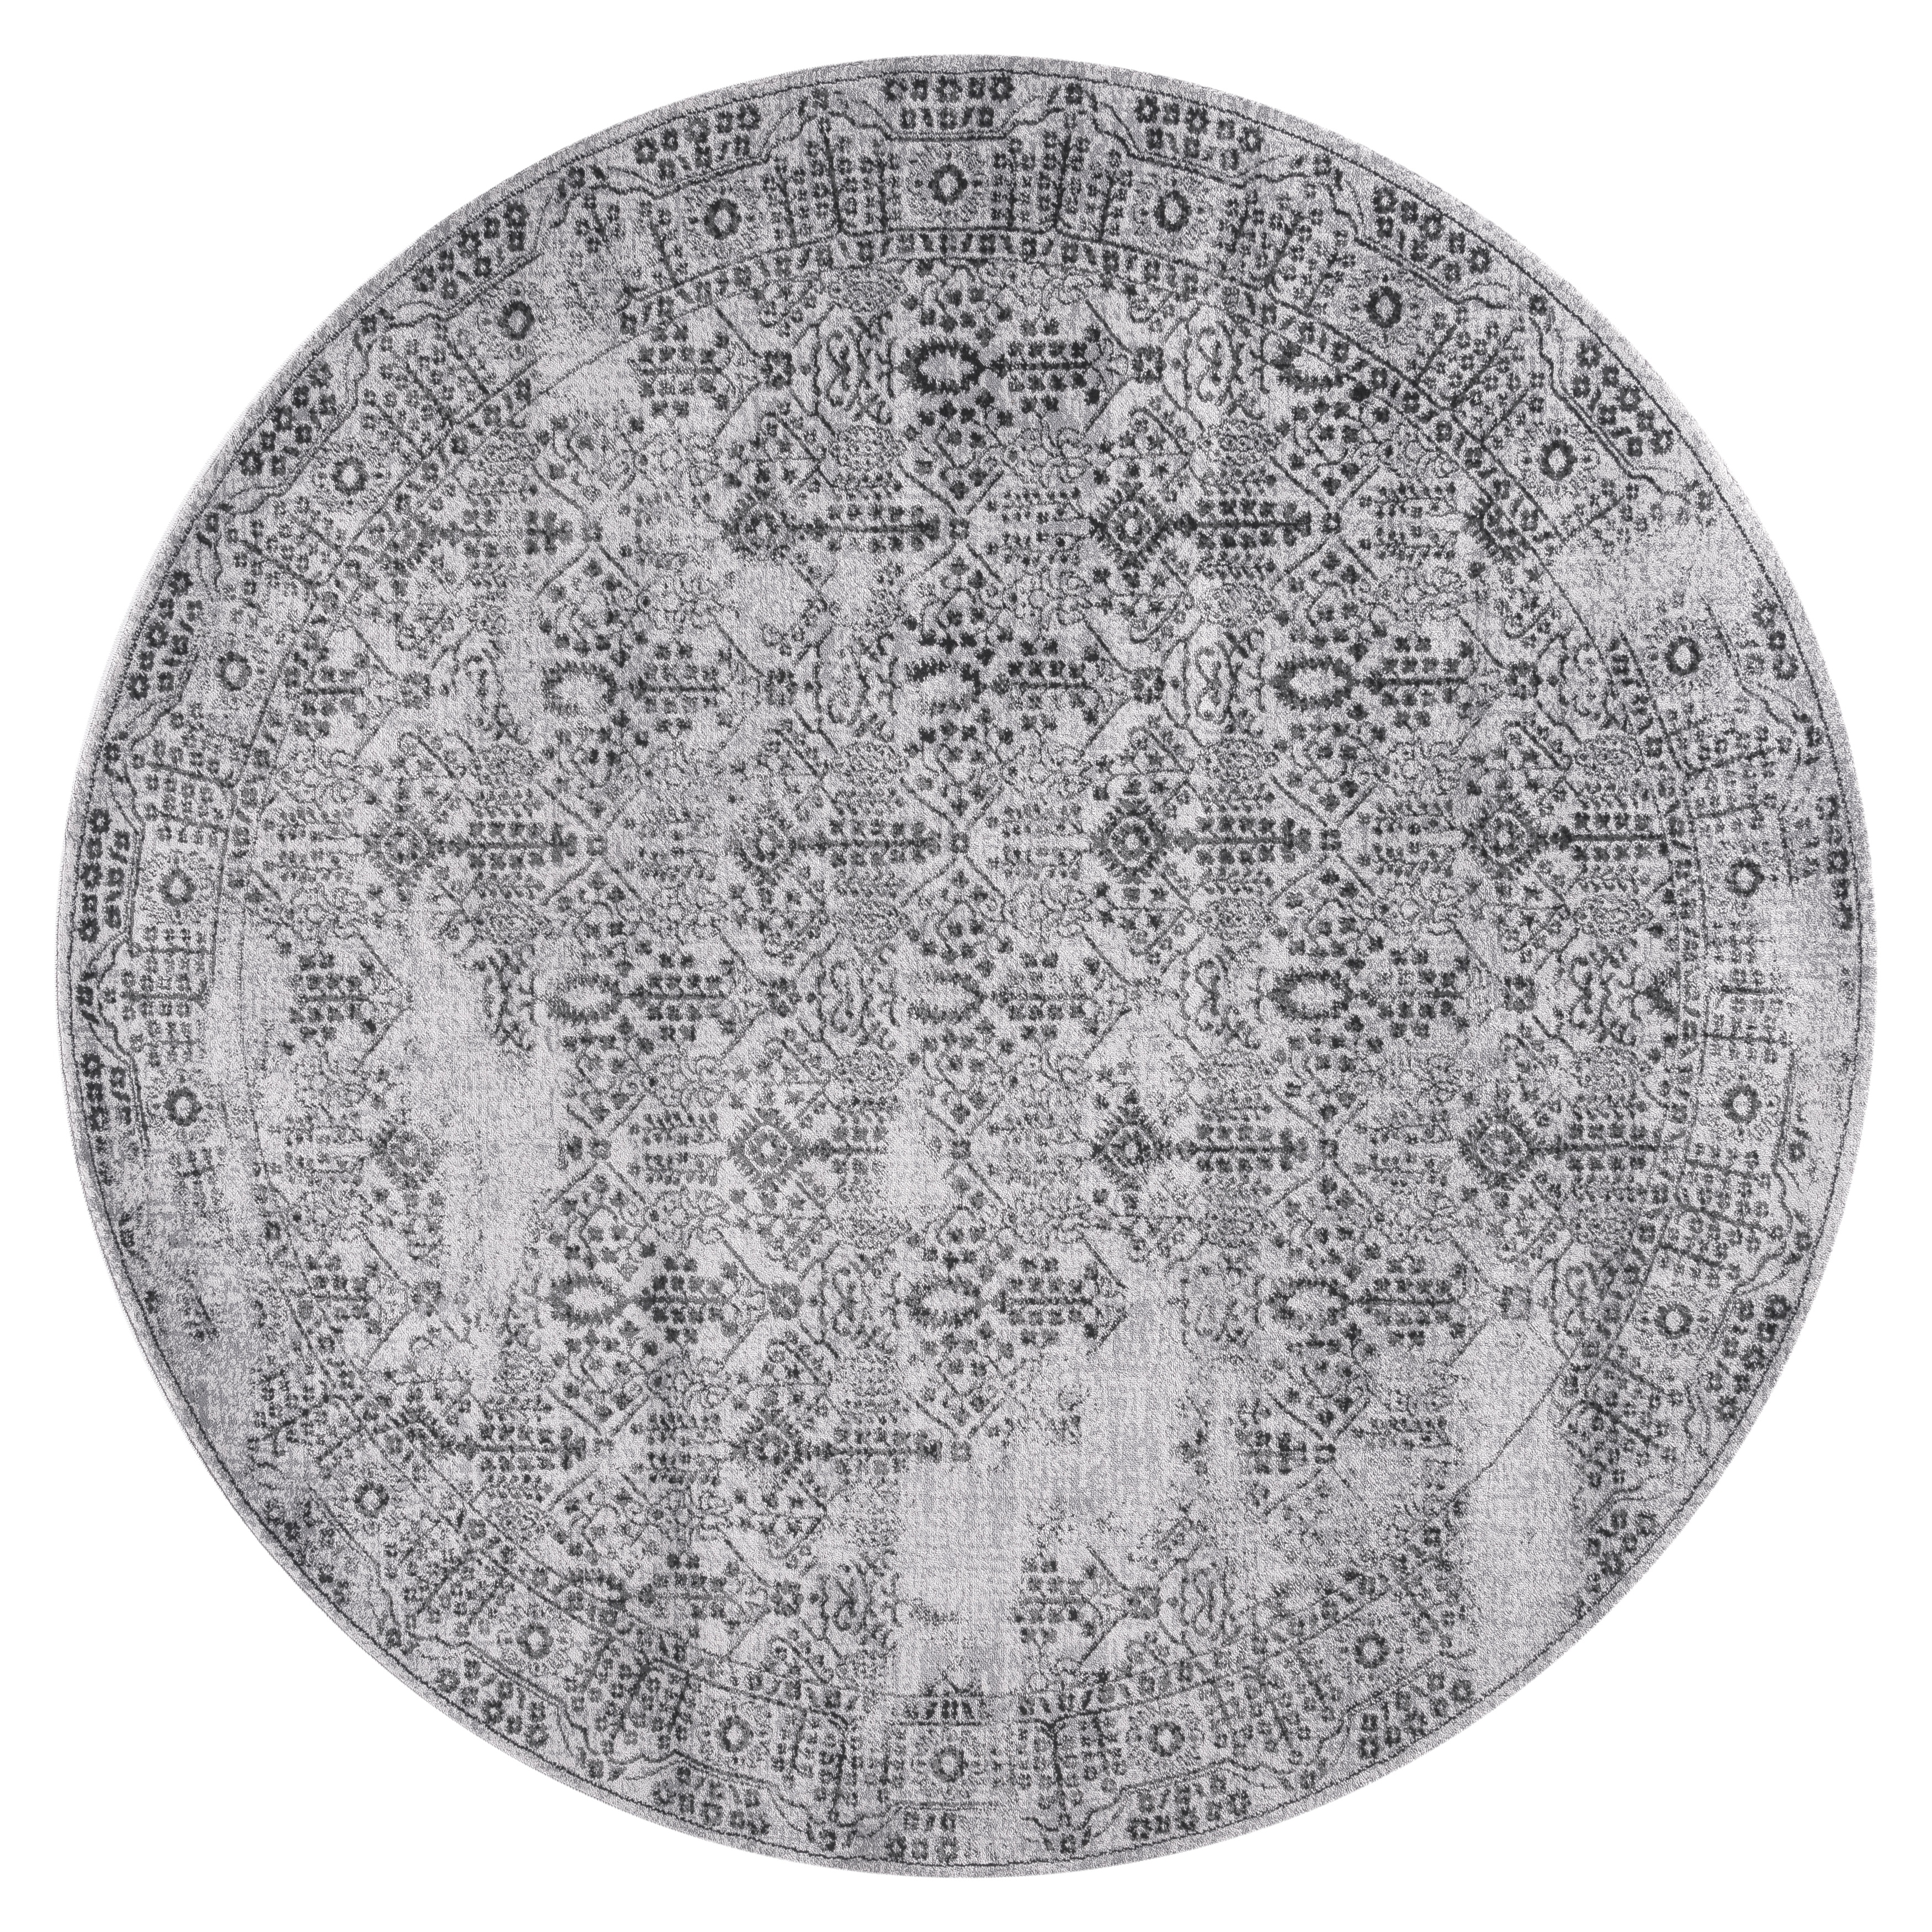 Gad Daisy Collection Garden Chic Classic/transional L.gray/d.gray Rug - 7r